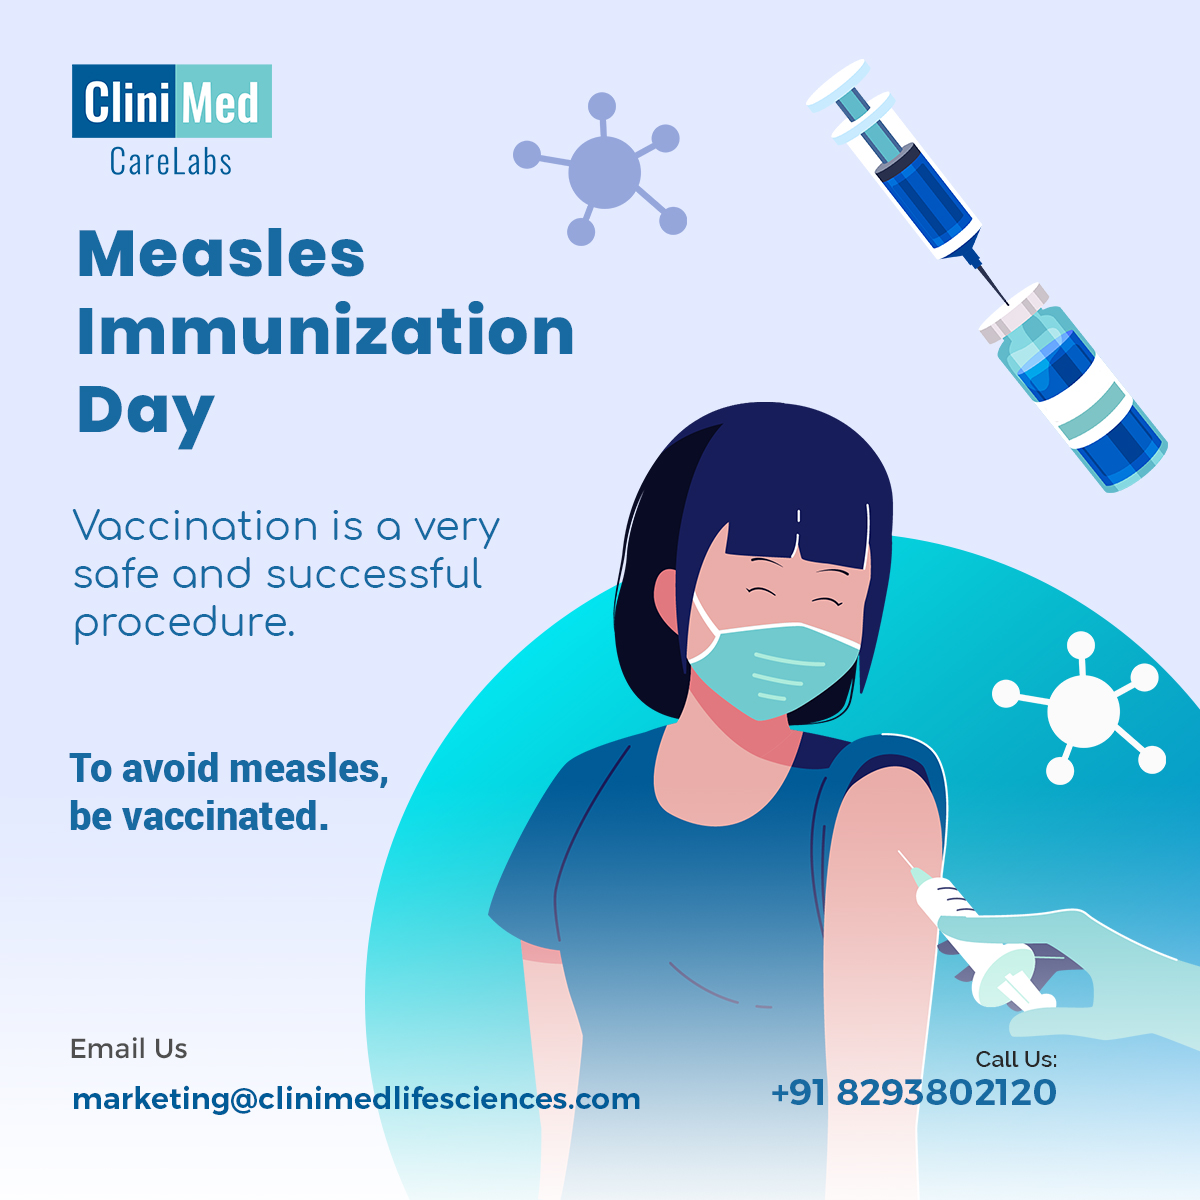 Every year on March 16th, Measles Immunization Day is observed to raise awareness about this terrible disease and the need of vaccinating against it.

#Measles #MeaslesImmunizationDay #MeaslesVaccination #MeaslesSymptoms #MeaslesComplications